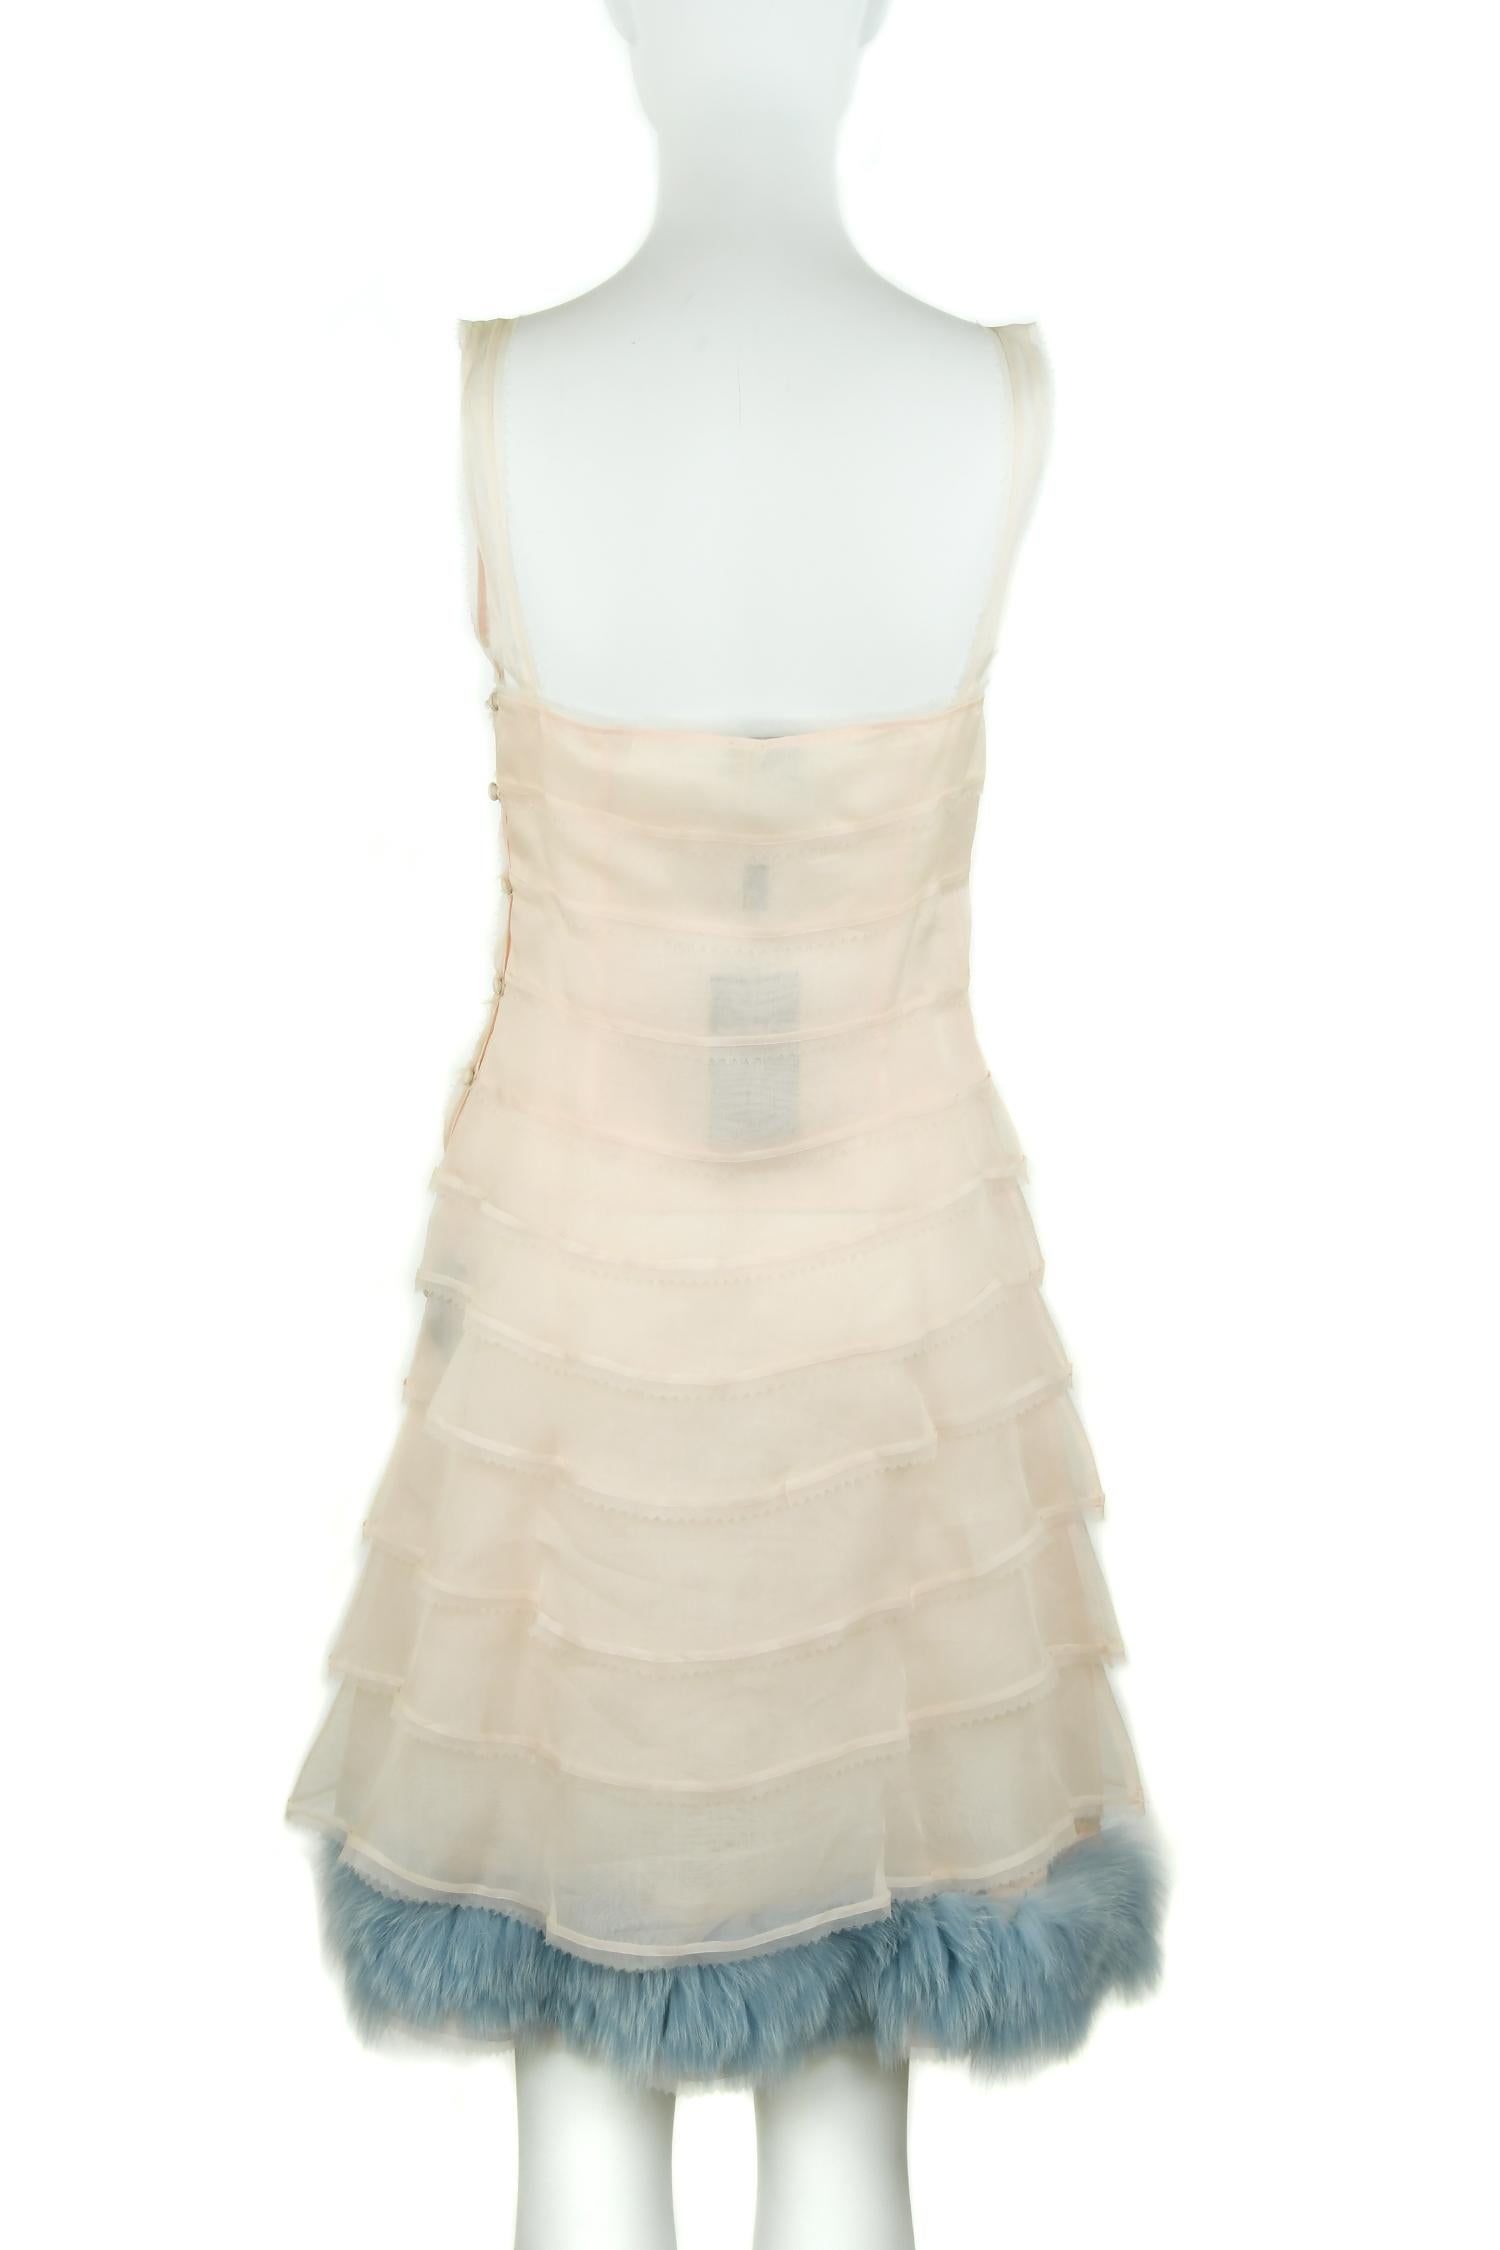 Absolutely incredible silk organza, in a very pale peach shade, with blue fur trim dress.  A line silhouette with tiers of organza with a picketed finish detail and a square neckline.  Classic and chic Fendi dress.

Size: IT 38

Condition: New with